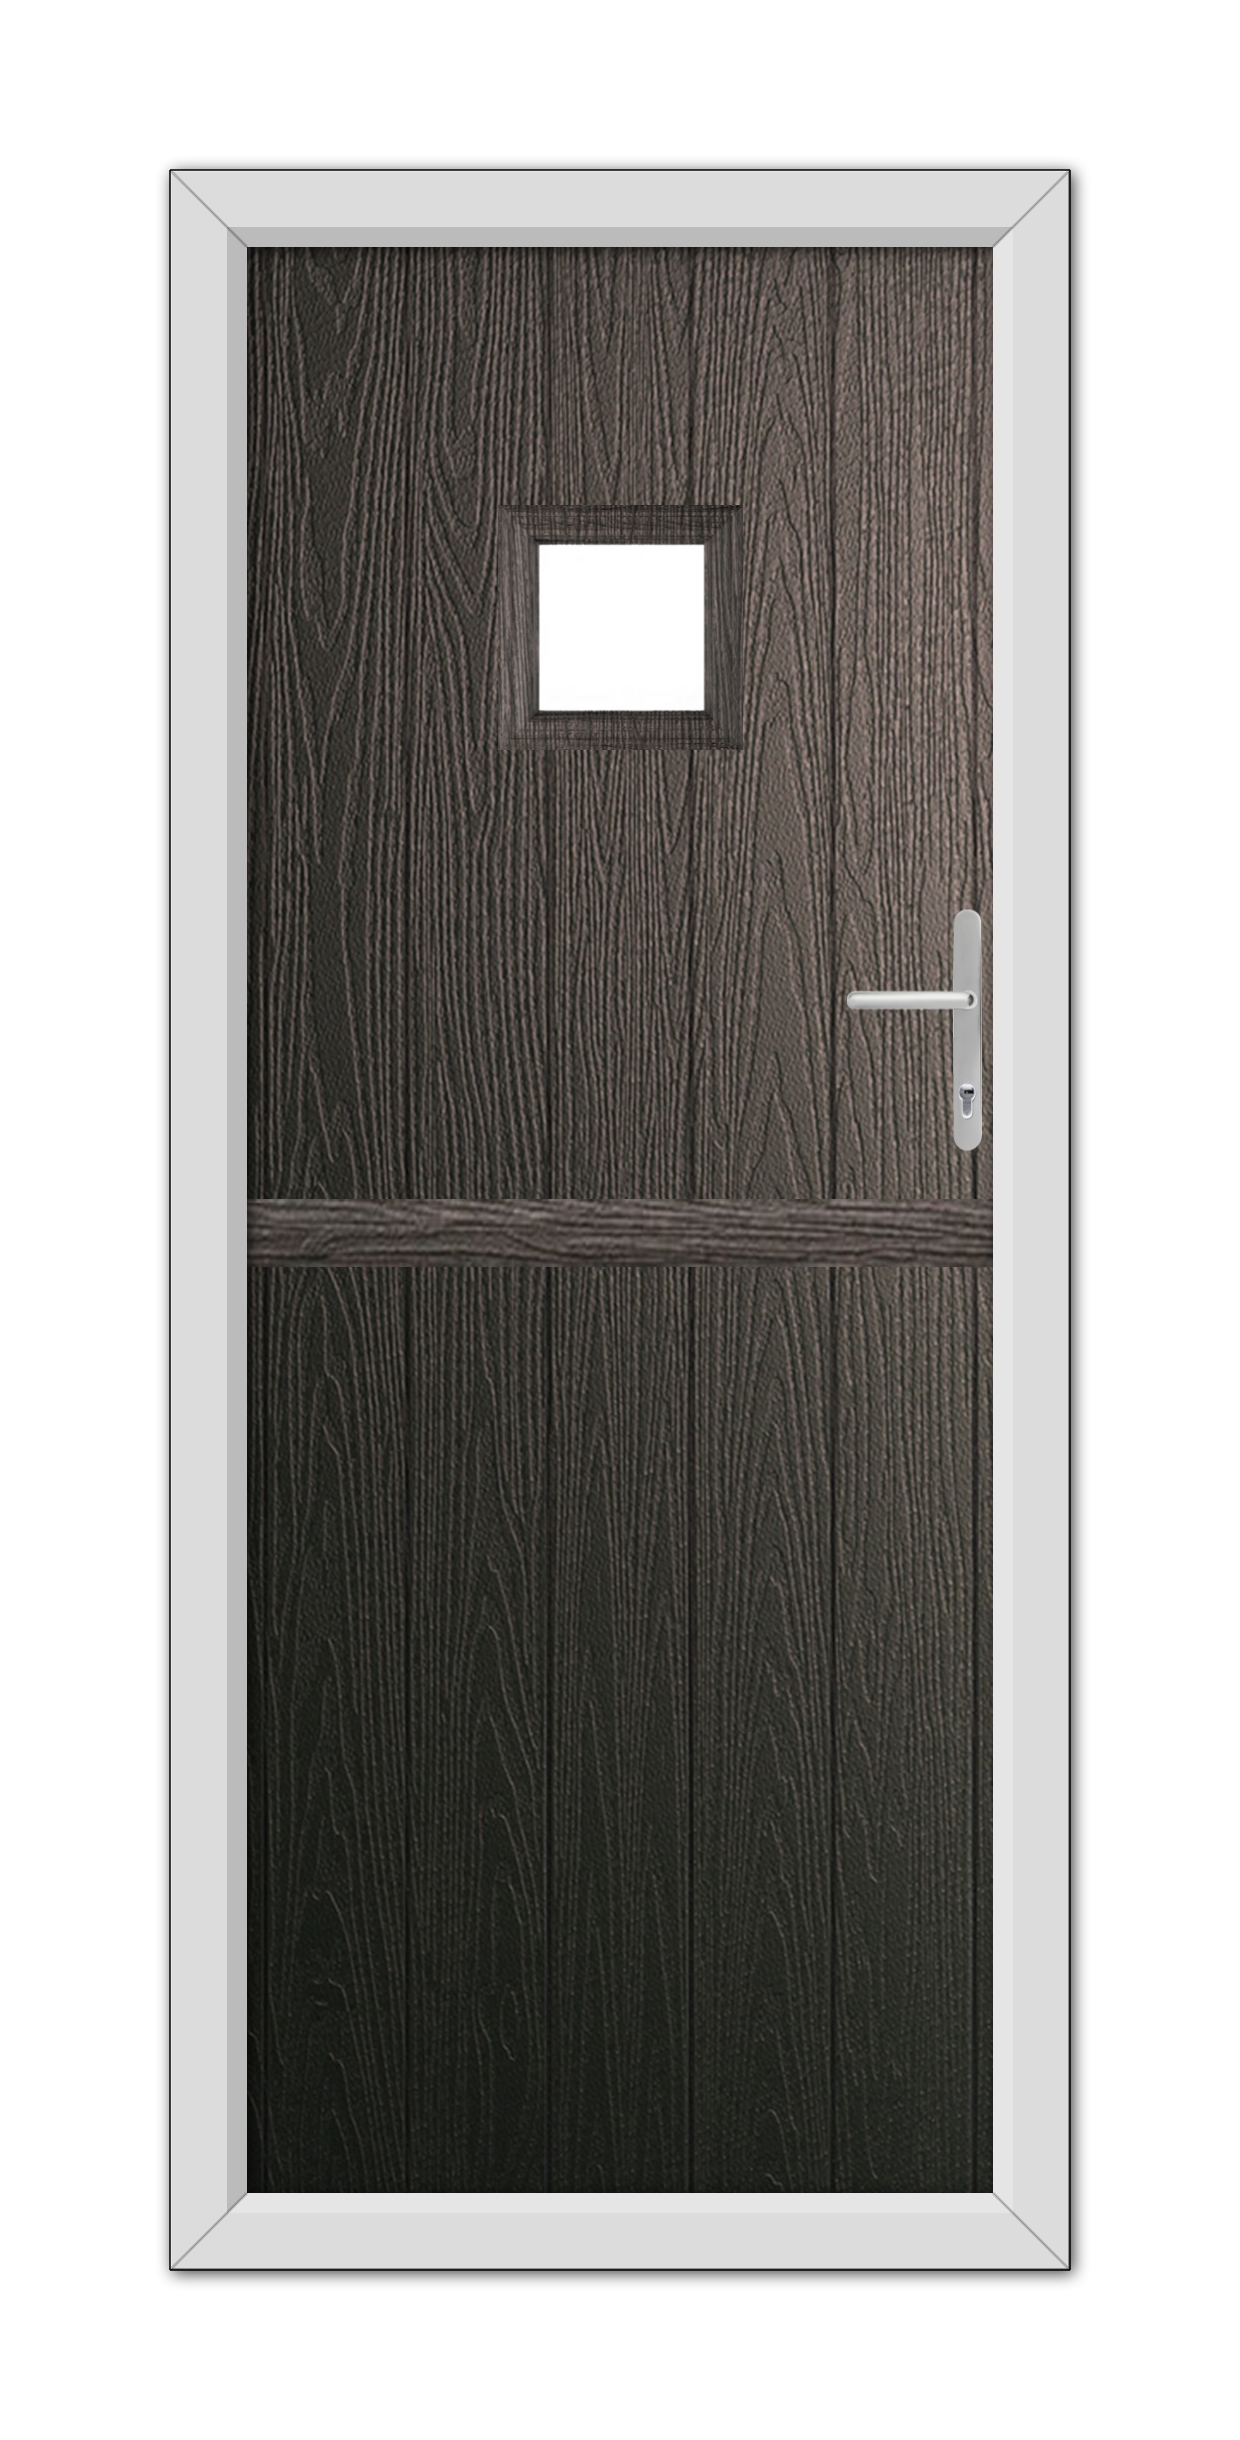 A Schwarzbraun Brampton Stable Composite Door 48mm Timber Core with a small square window at the top, framed in white, and equipped with a modern handle on the right side.